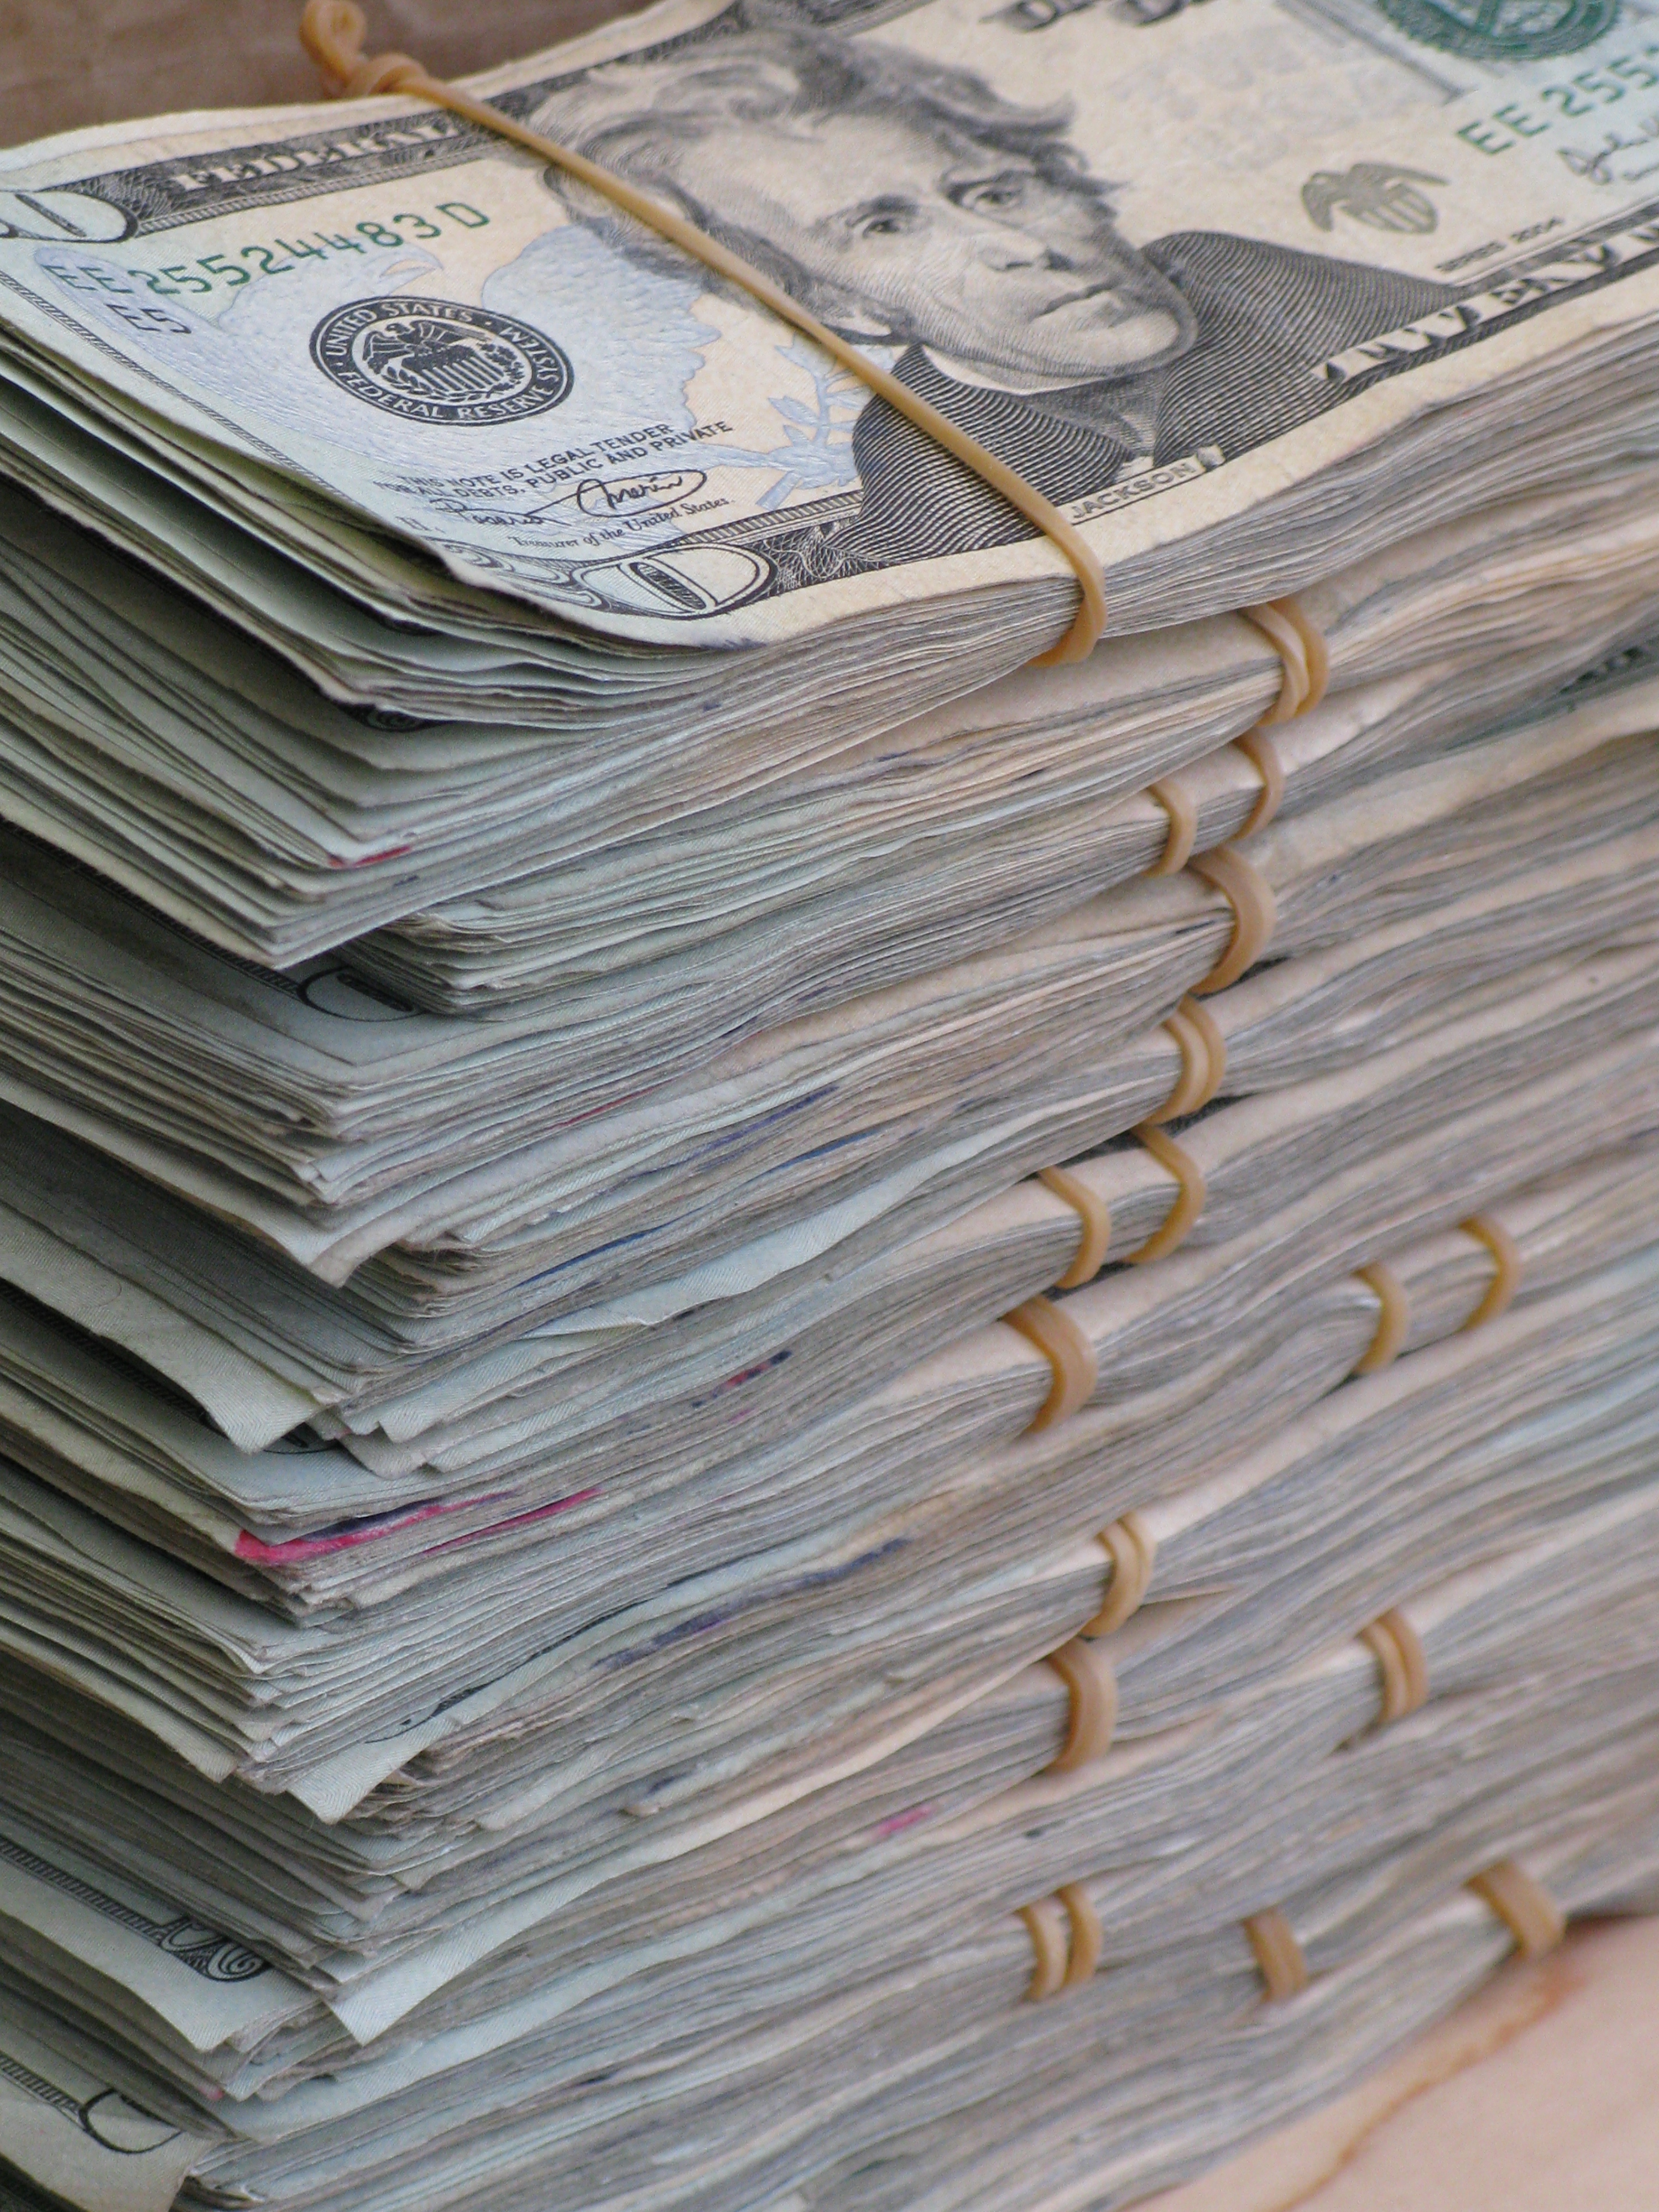 pictures of stacks of money